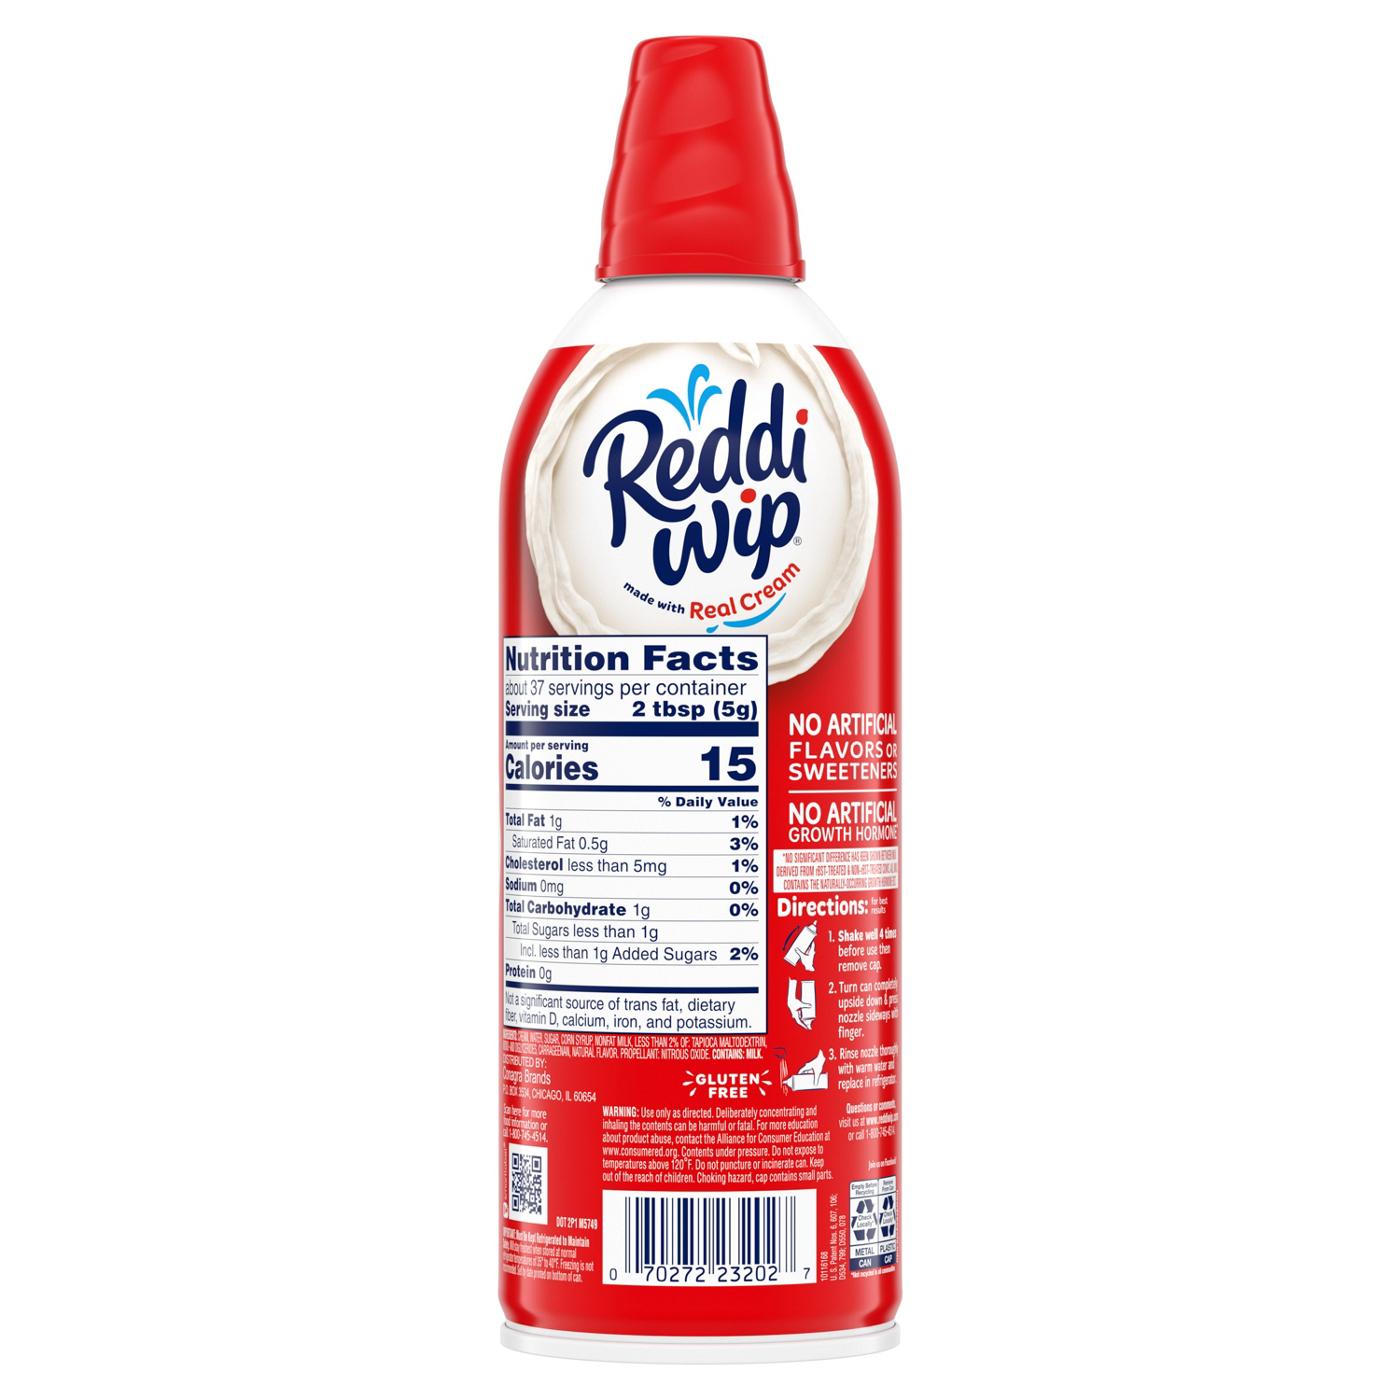 Reddi Wip Original Whipped Topping Made with Real Cream; image 2 of 7